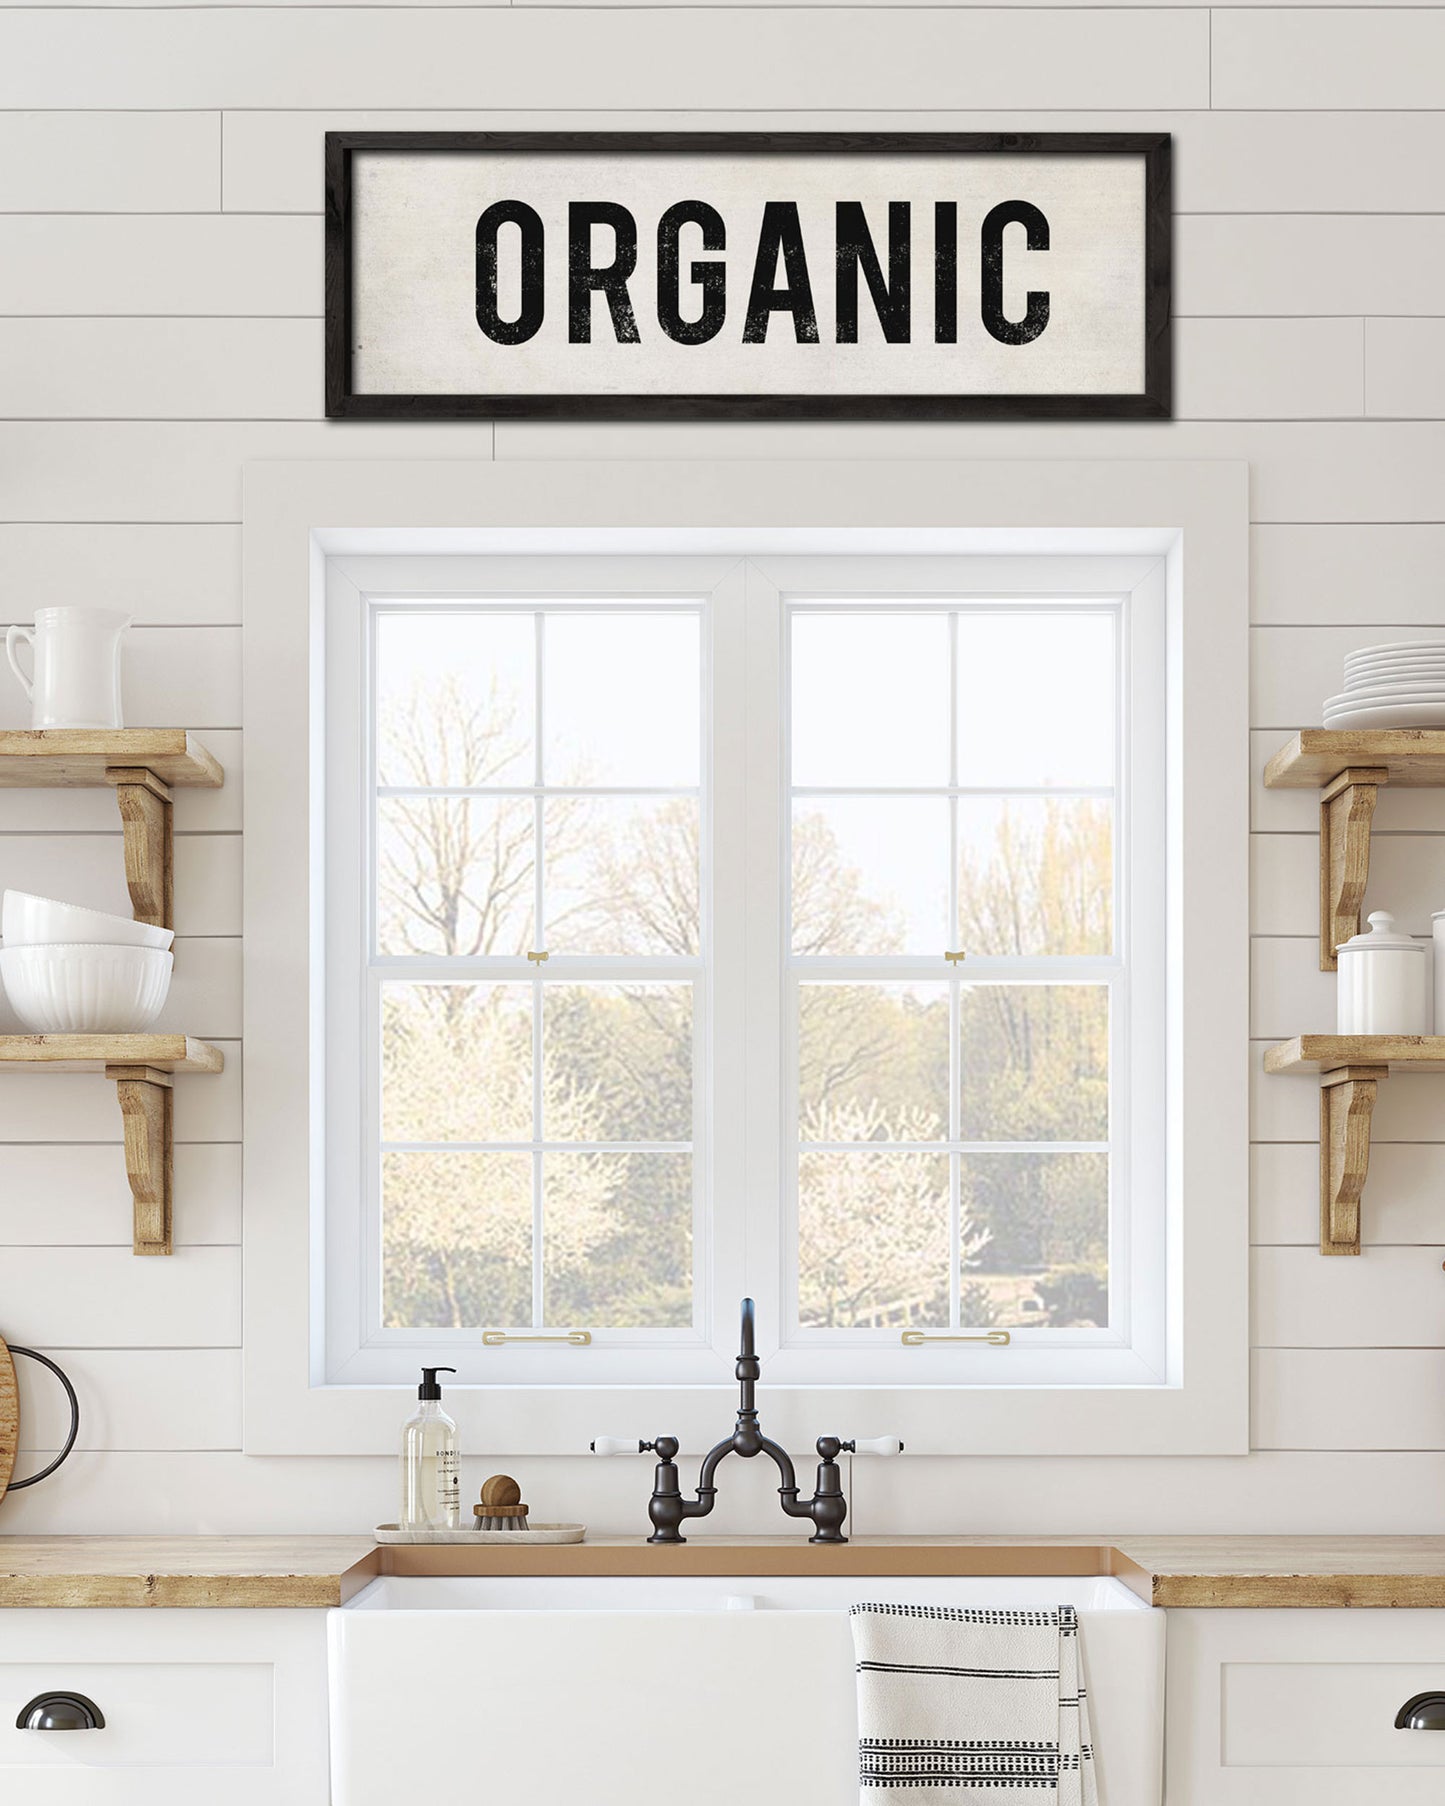 Decorative Kitchen Signs, Wall Signs, Organic Sign - Transit Design